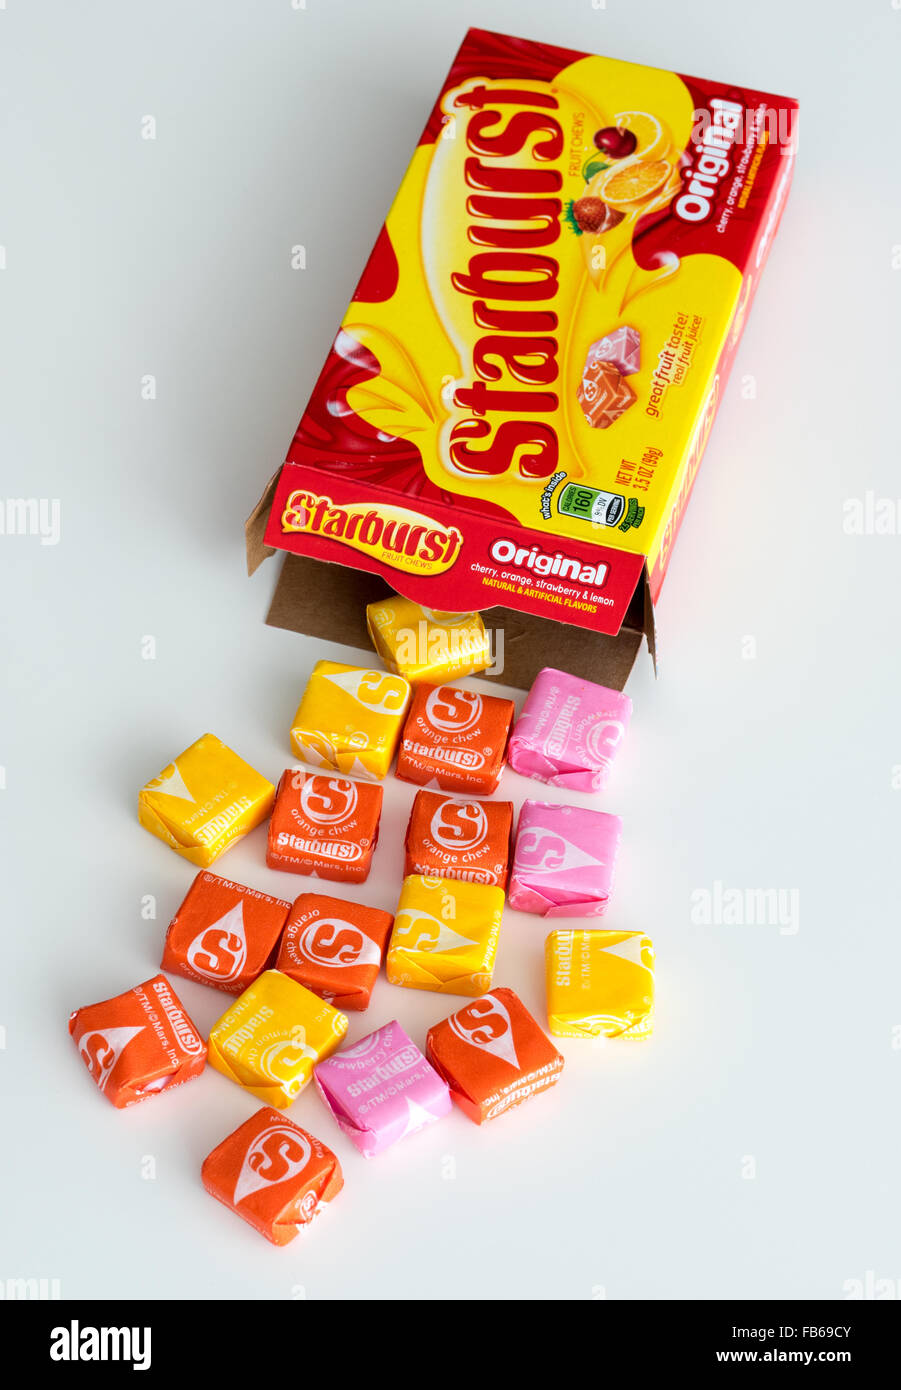 A box of Starburst candy, a fruit-flavored candy manufactured by the Wrigley Company. Stock Photo